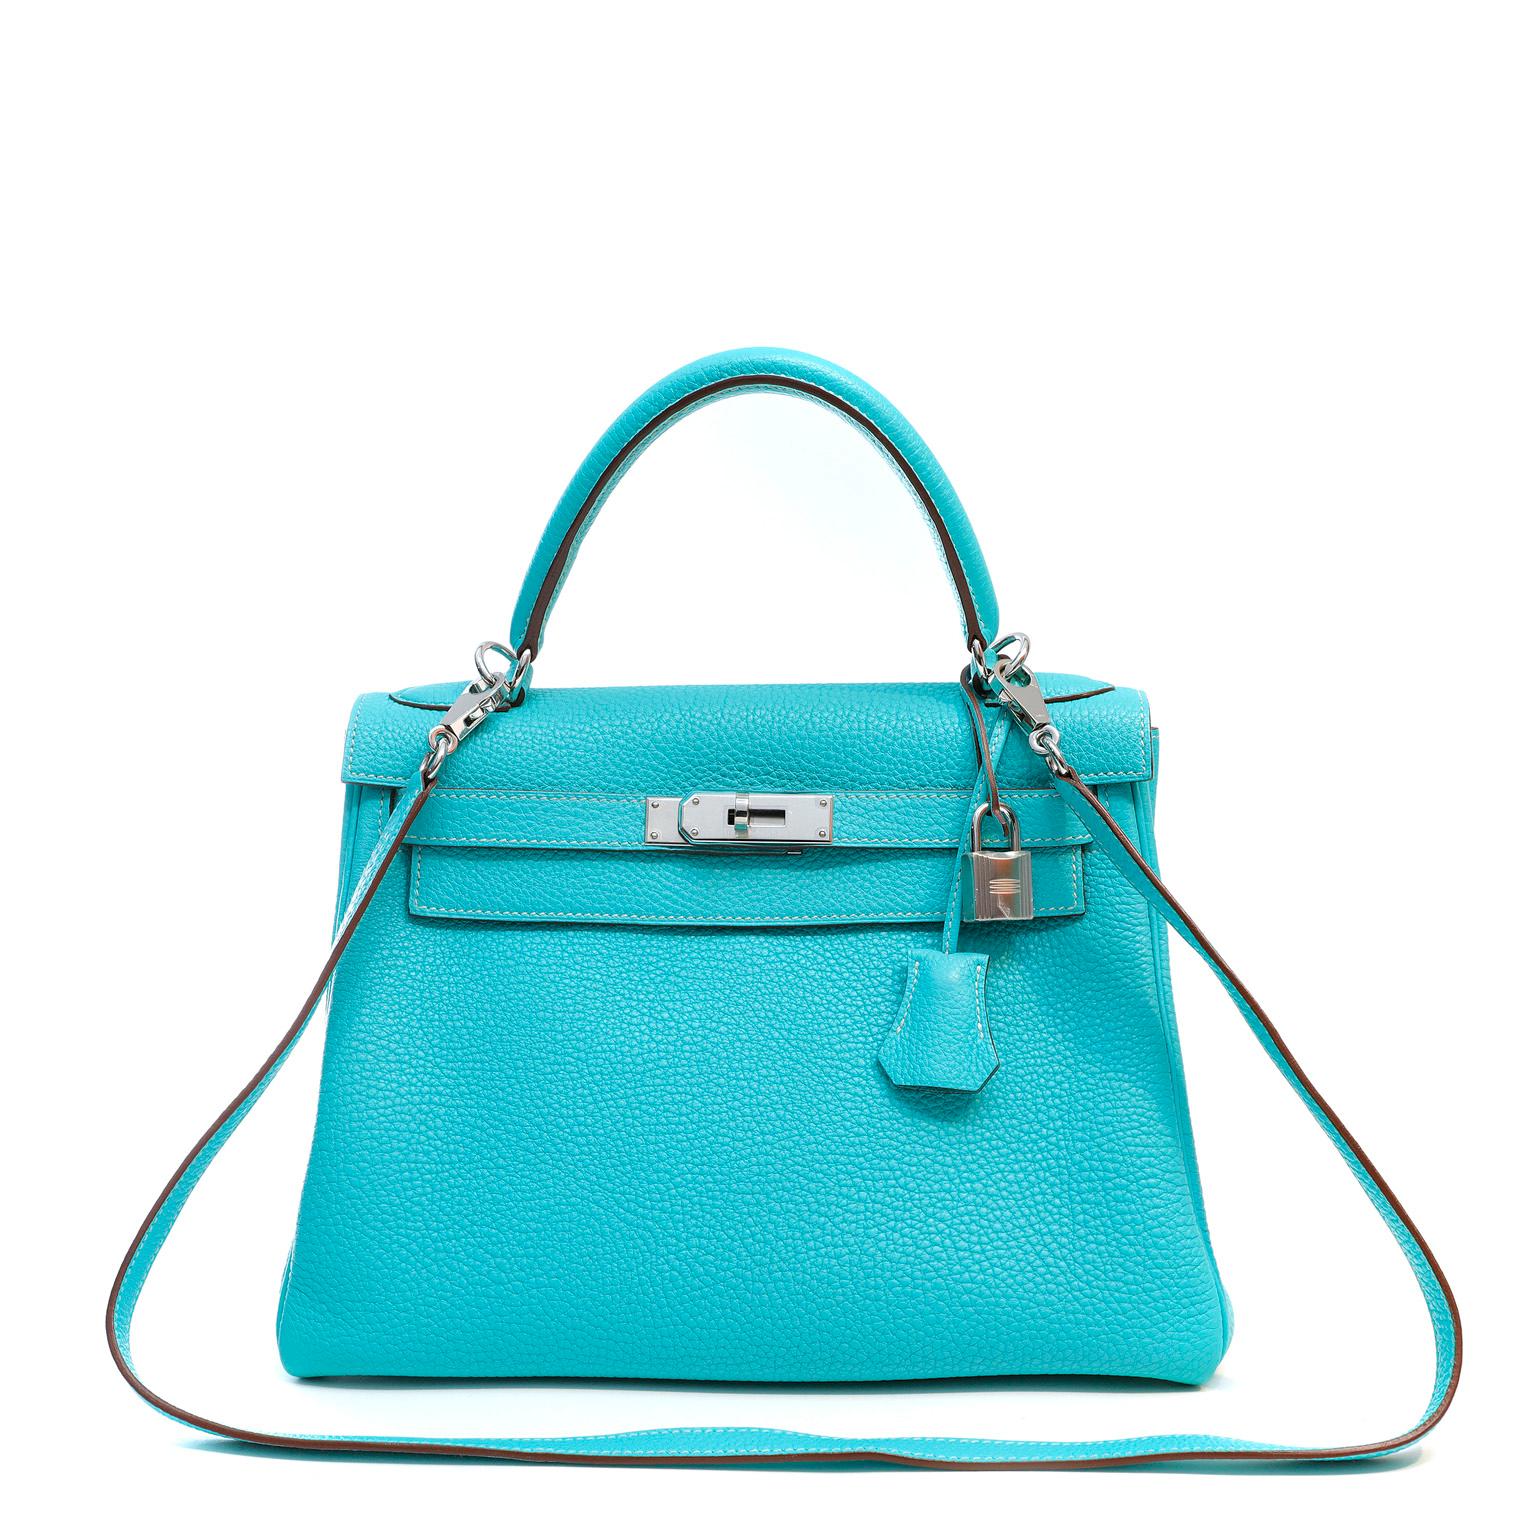 This authentic Hermès Aqua Blue Togo Leather 28 cm Kelly Bag is in pristine condition with the protective plastic intact on the hardware.    Hermès bags are considered the ultimate luxury item worldwide.  Each piece is handcrafted with waitlists